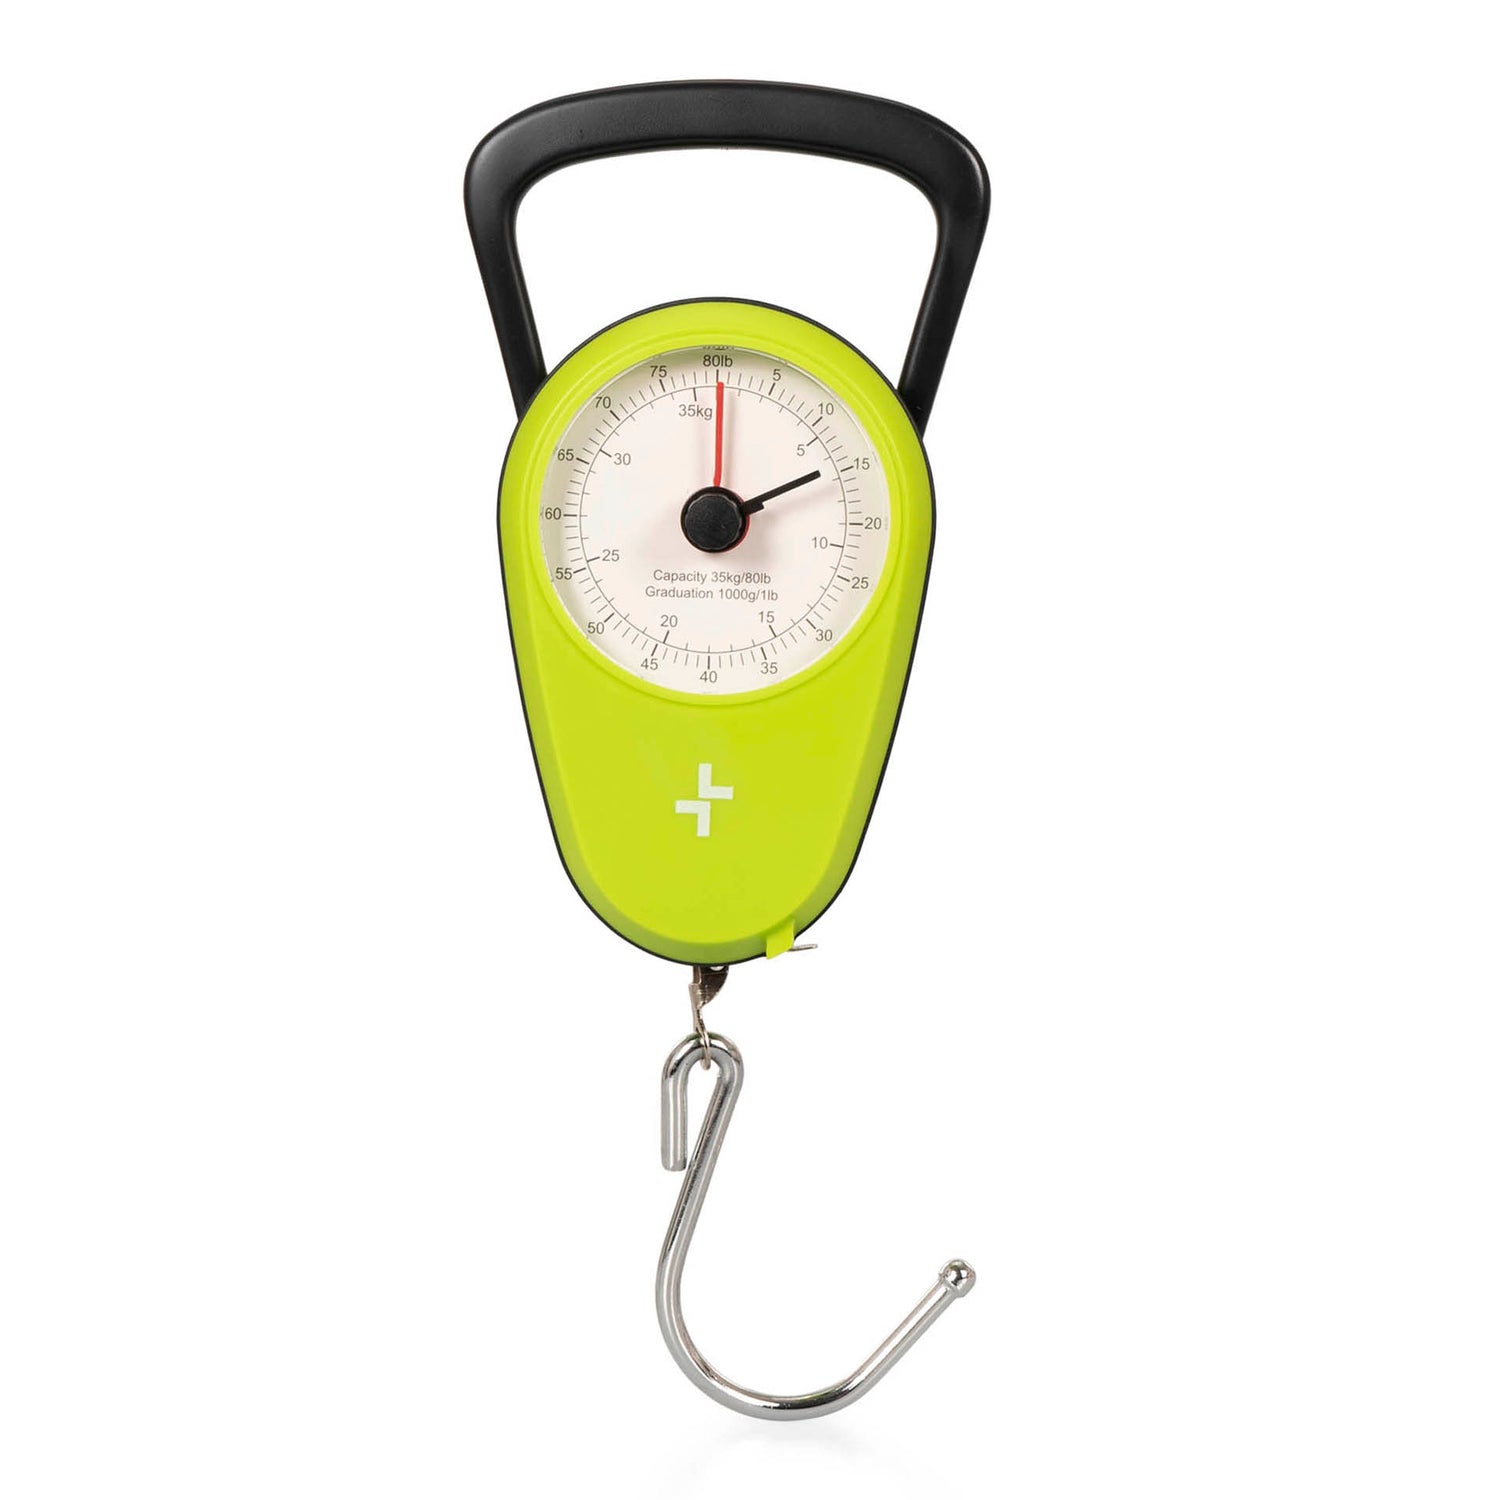 Front side view of a green analog luggage scale designed by Tracker showing its dial, handle, hook, and neon green colour.